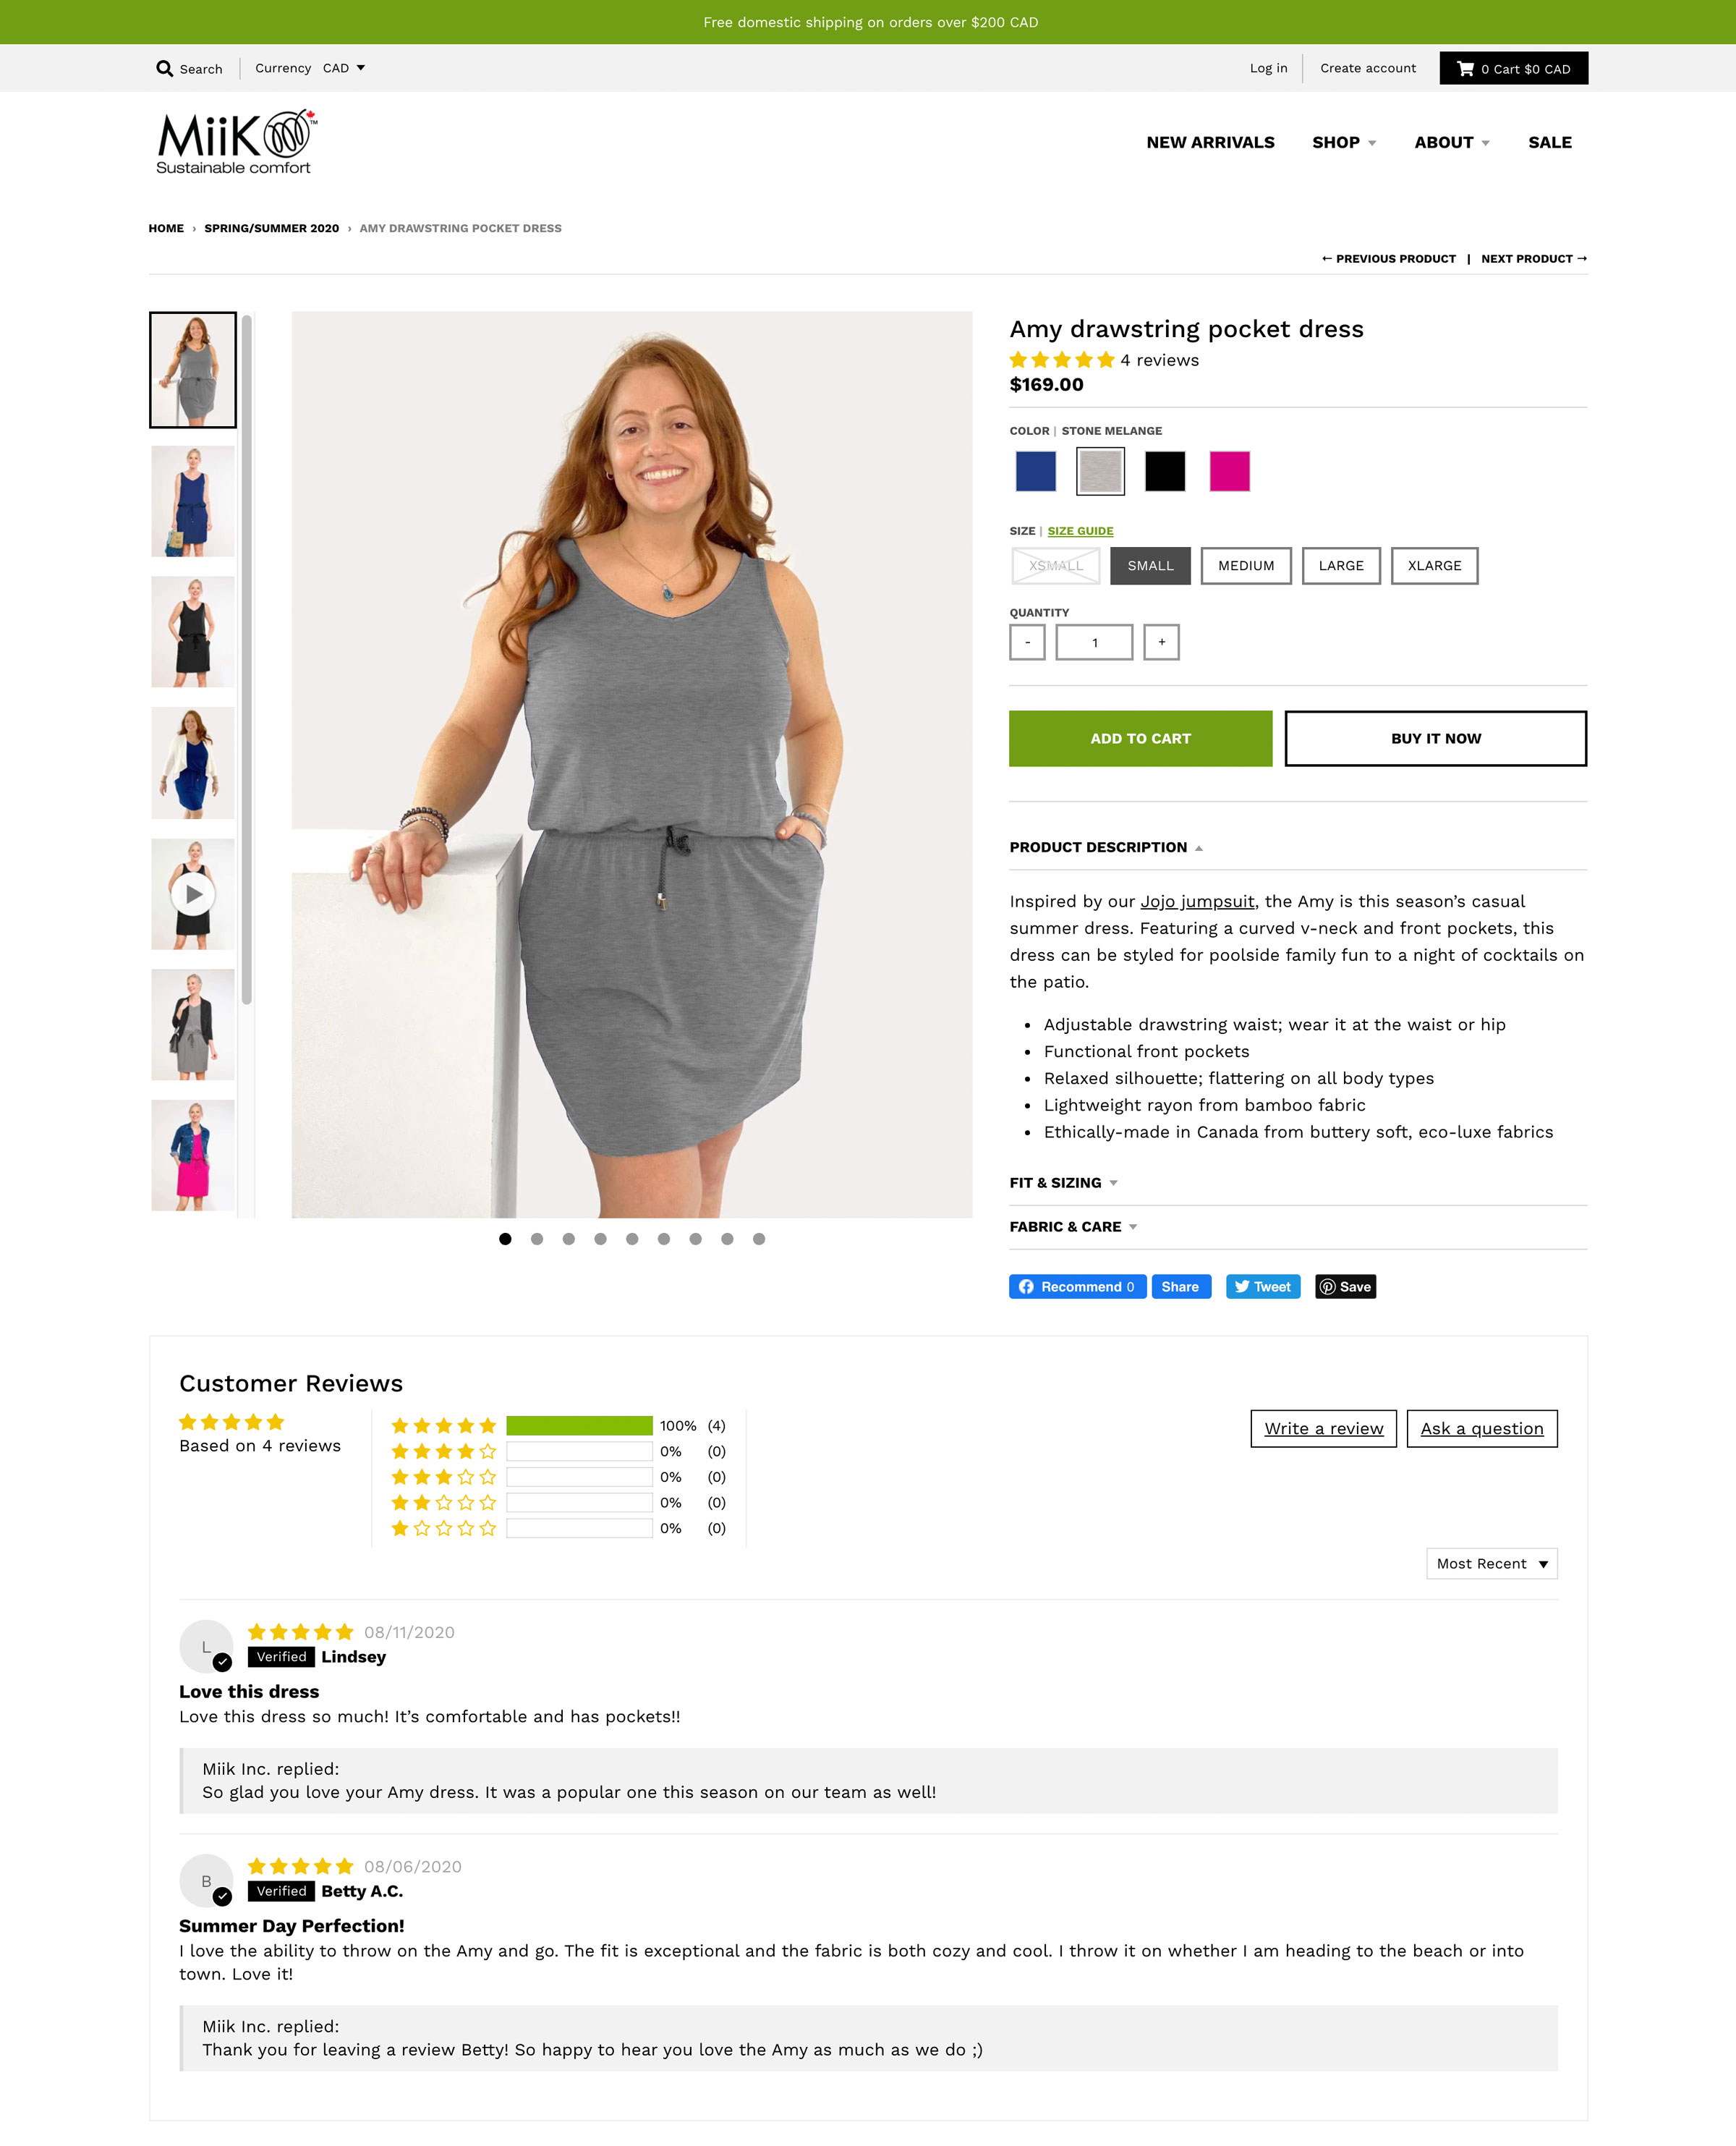 Screenshot of Miik's new product page design, with a large photo of a woman in a dress and small thumbnails of additional images to its left.